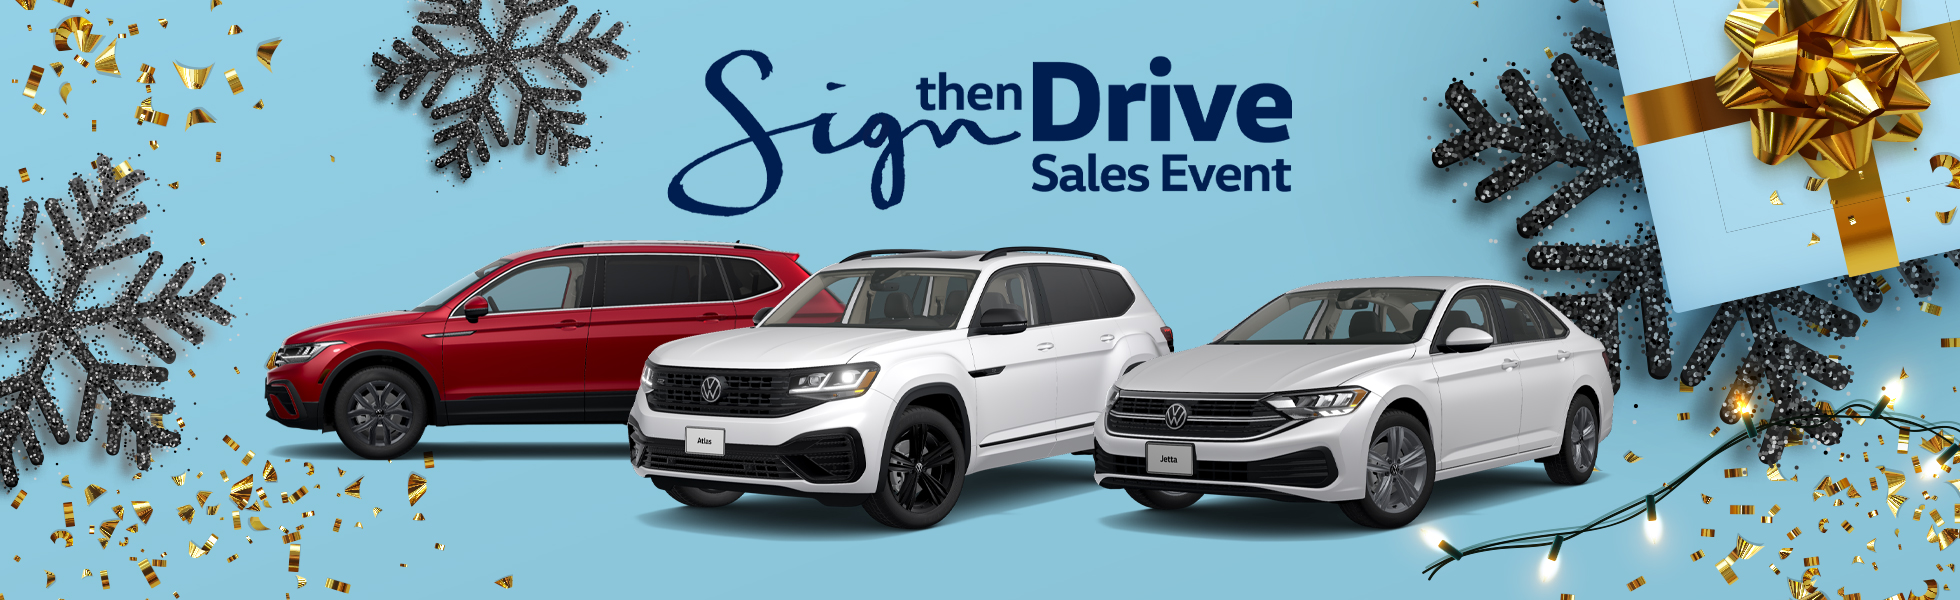 Volkswagen Sign then Drive Sales event banner featuring multiple VW models on display and winter holiday decorations